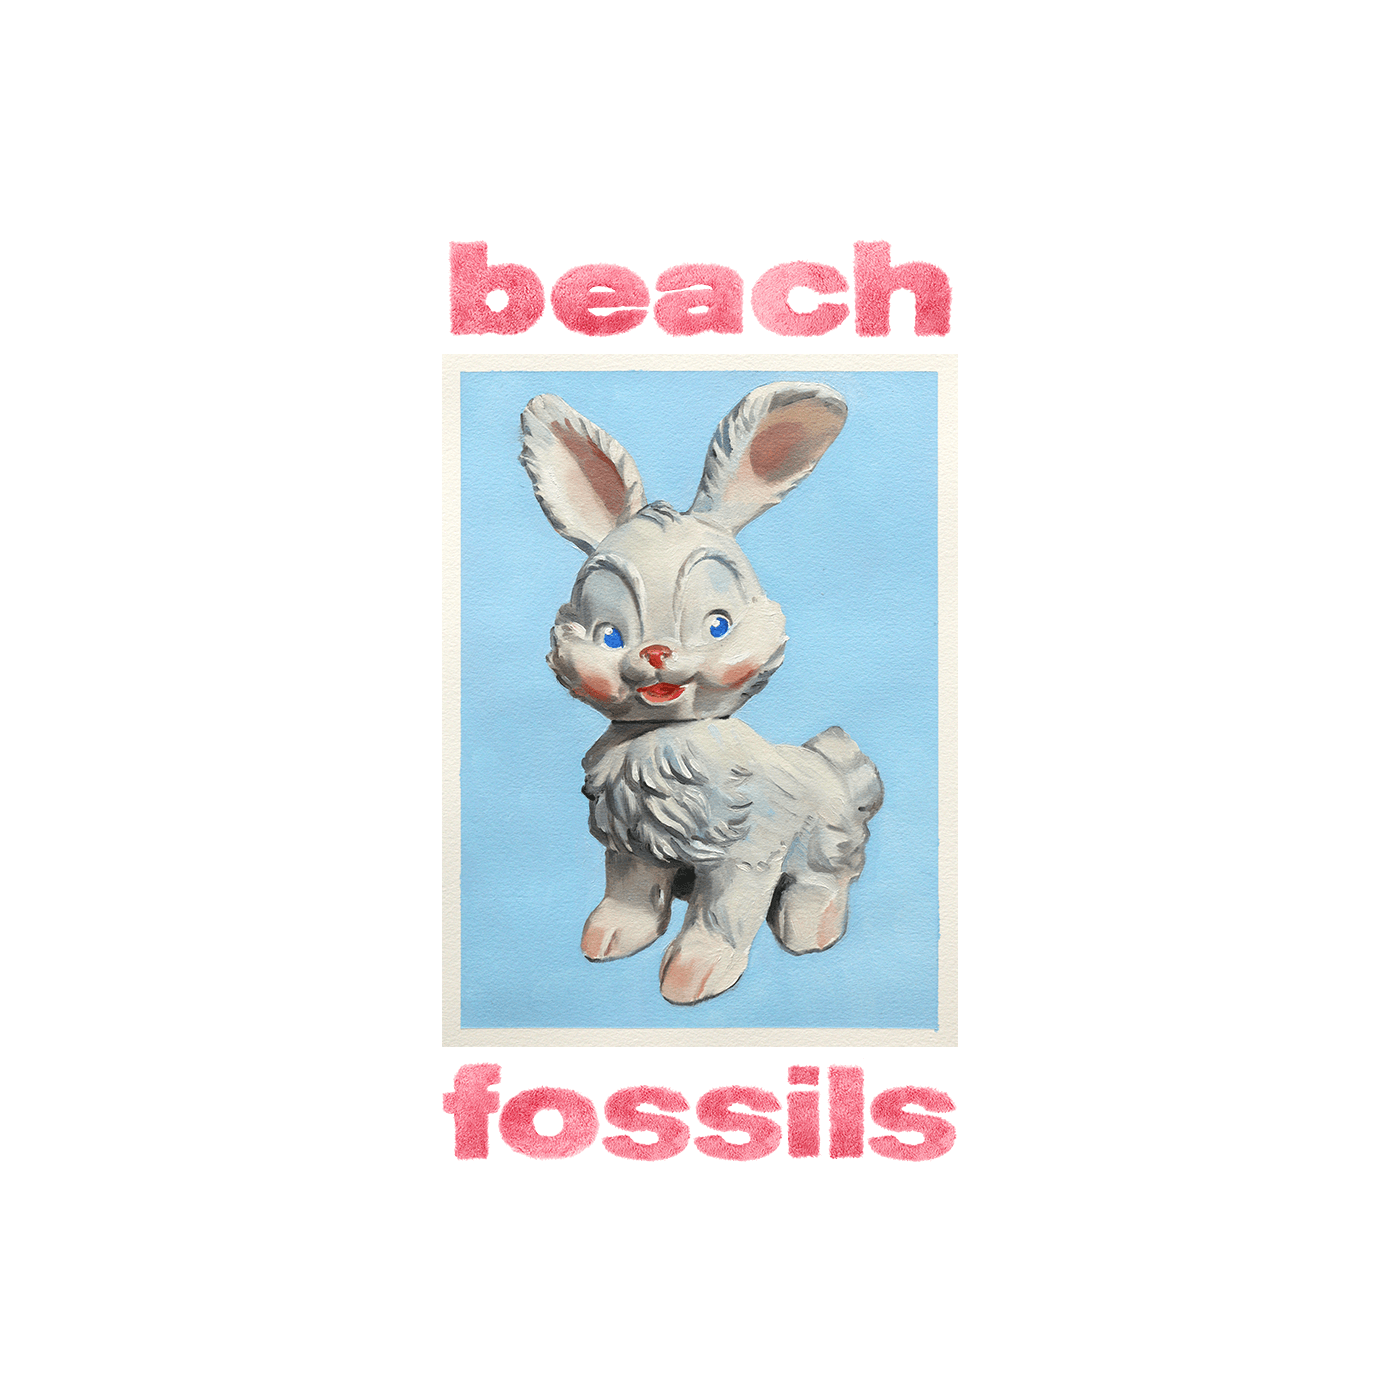 Beach Fossils by Bunny album review by Greg Walker for Northern Transmissions